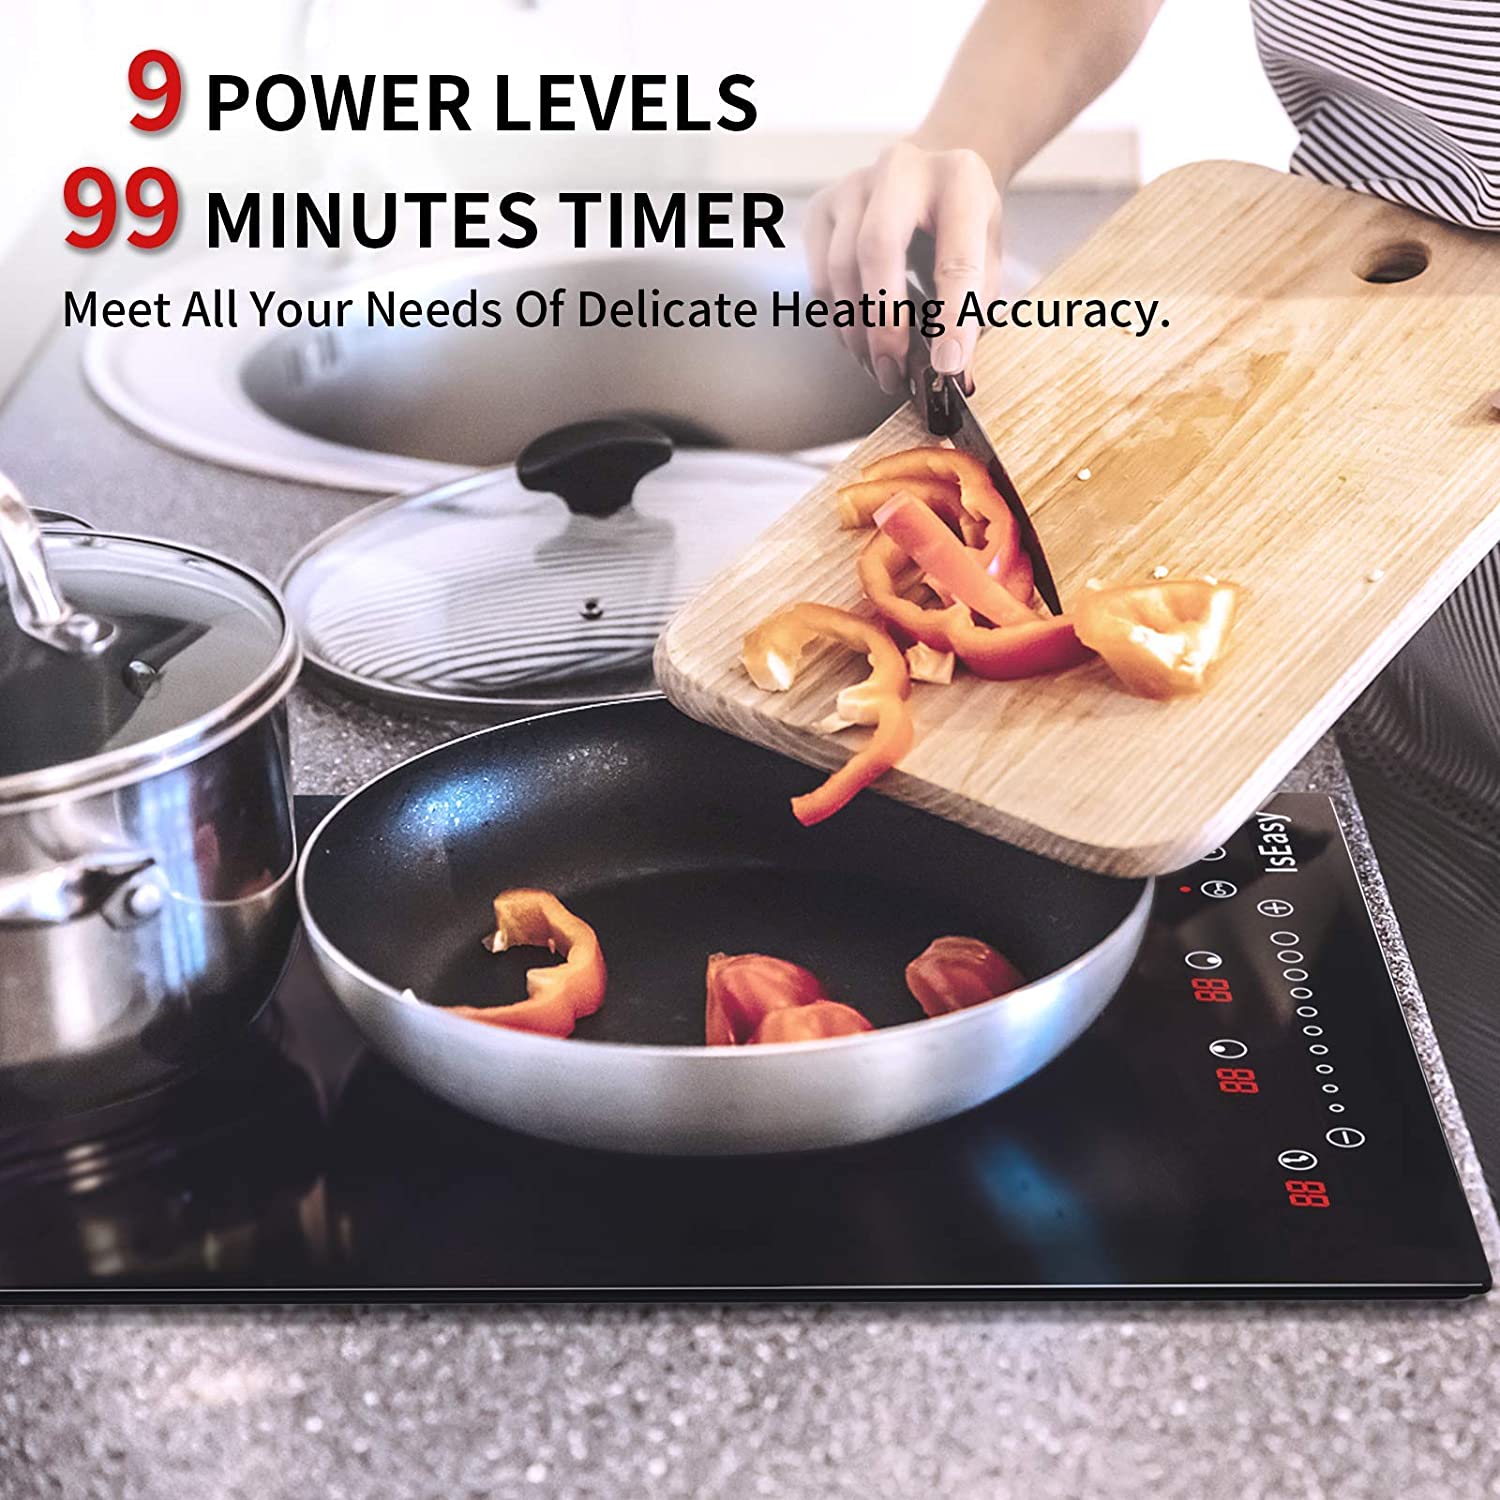 Electric Cooktop Ceramic Stove 2 Burners 12 inch Built-in Countertop Burners Cooker Satin Glass in Black Touch Sensor Control,Timer, 9 Power Levels,220-240V 3000W